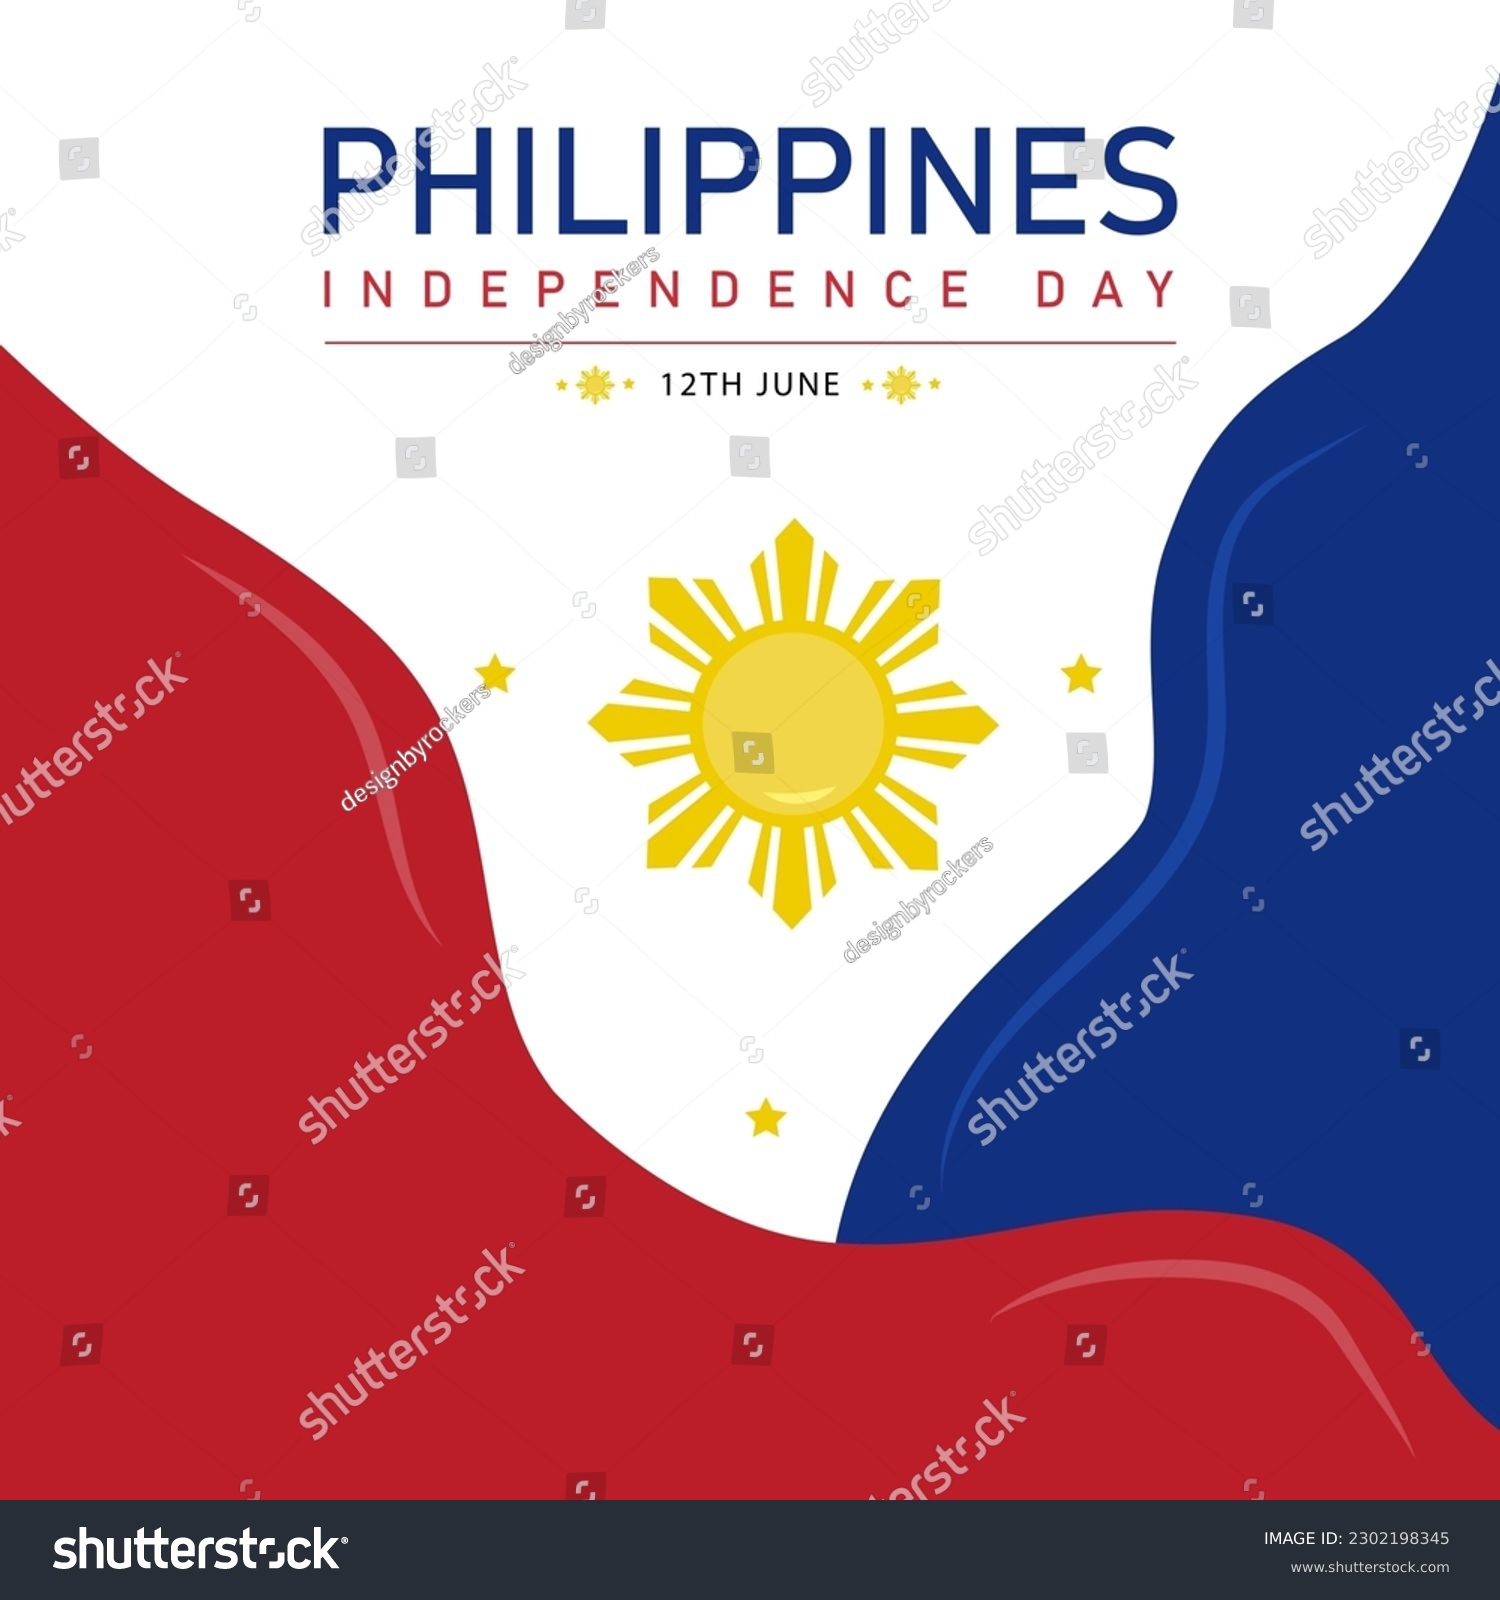 SVG of Philippine Independence Day, also known as Araw ng Kalayaan in the Filipino language, is celebrated every year on June 12th to commemorate the country's independence from Spain in 1898. svg